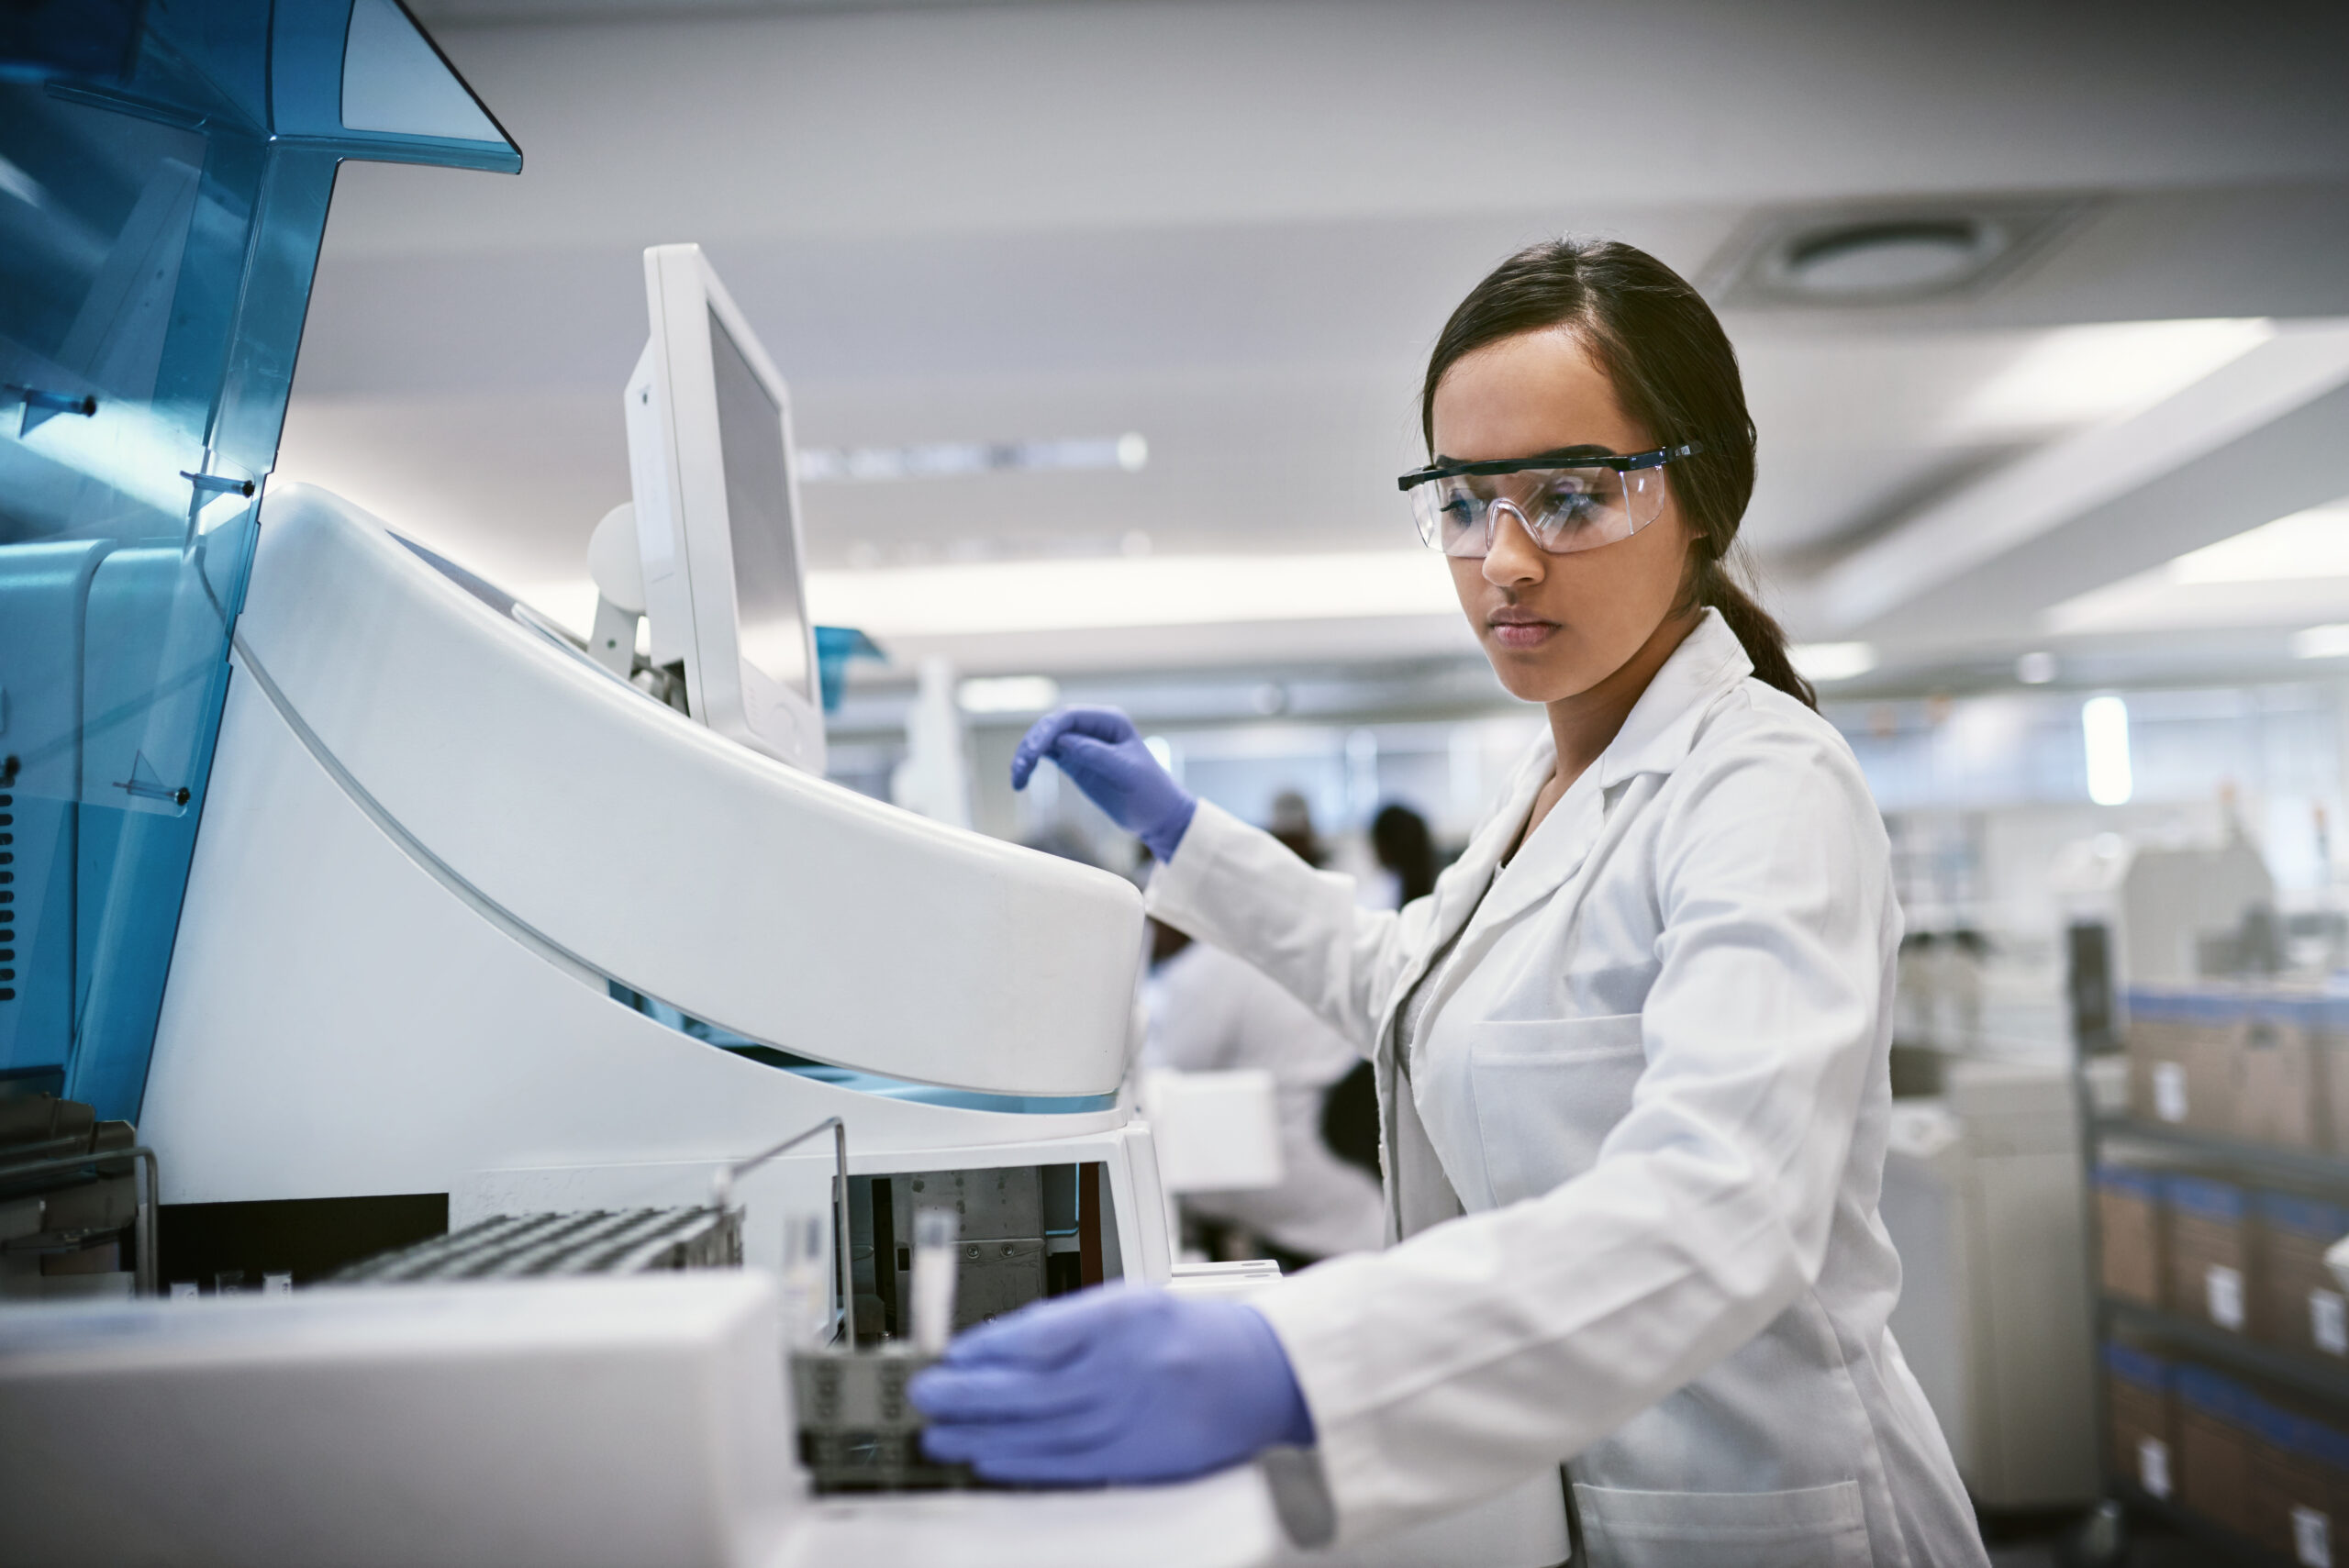 Working Together to Address the Laboratory Workforce Shortage